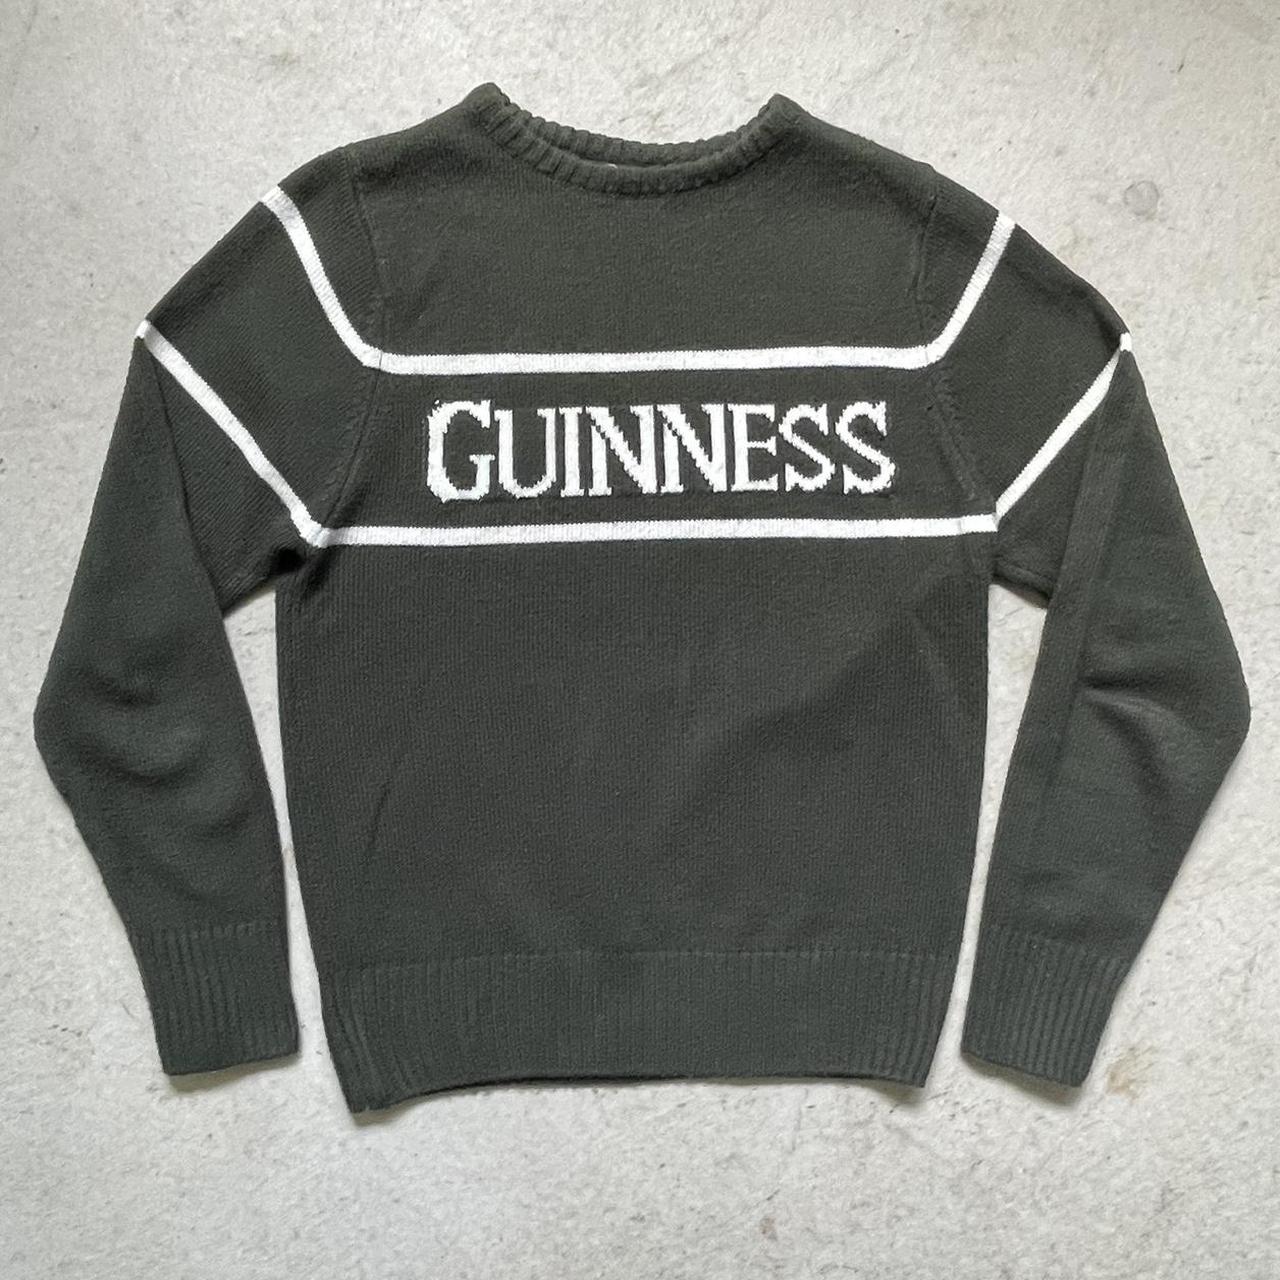 Irish Guinness beer stout brand jumper hard to come by - Depop